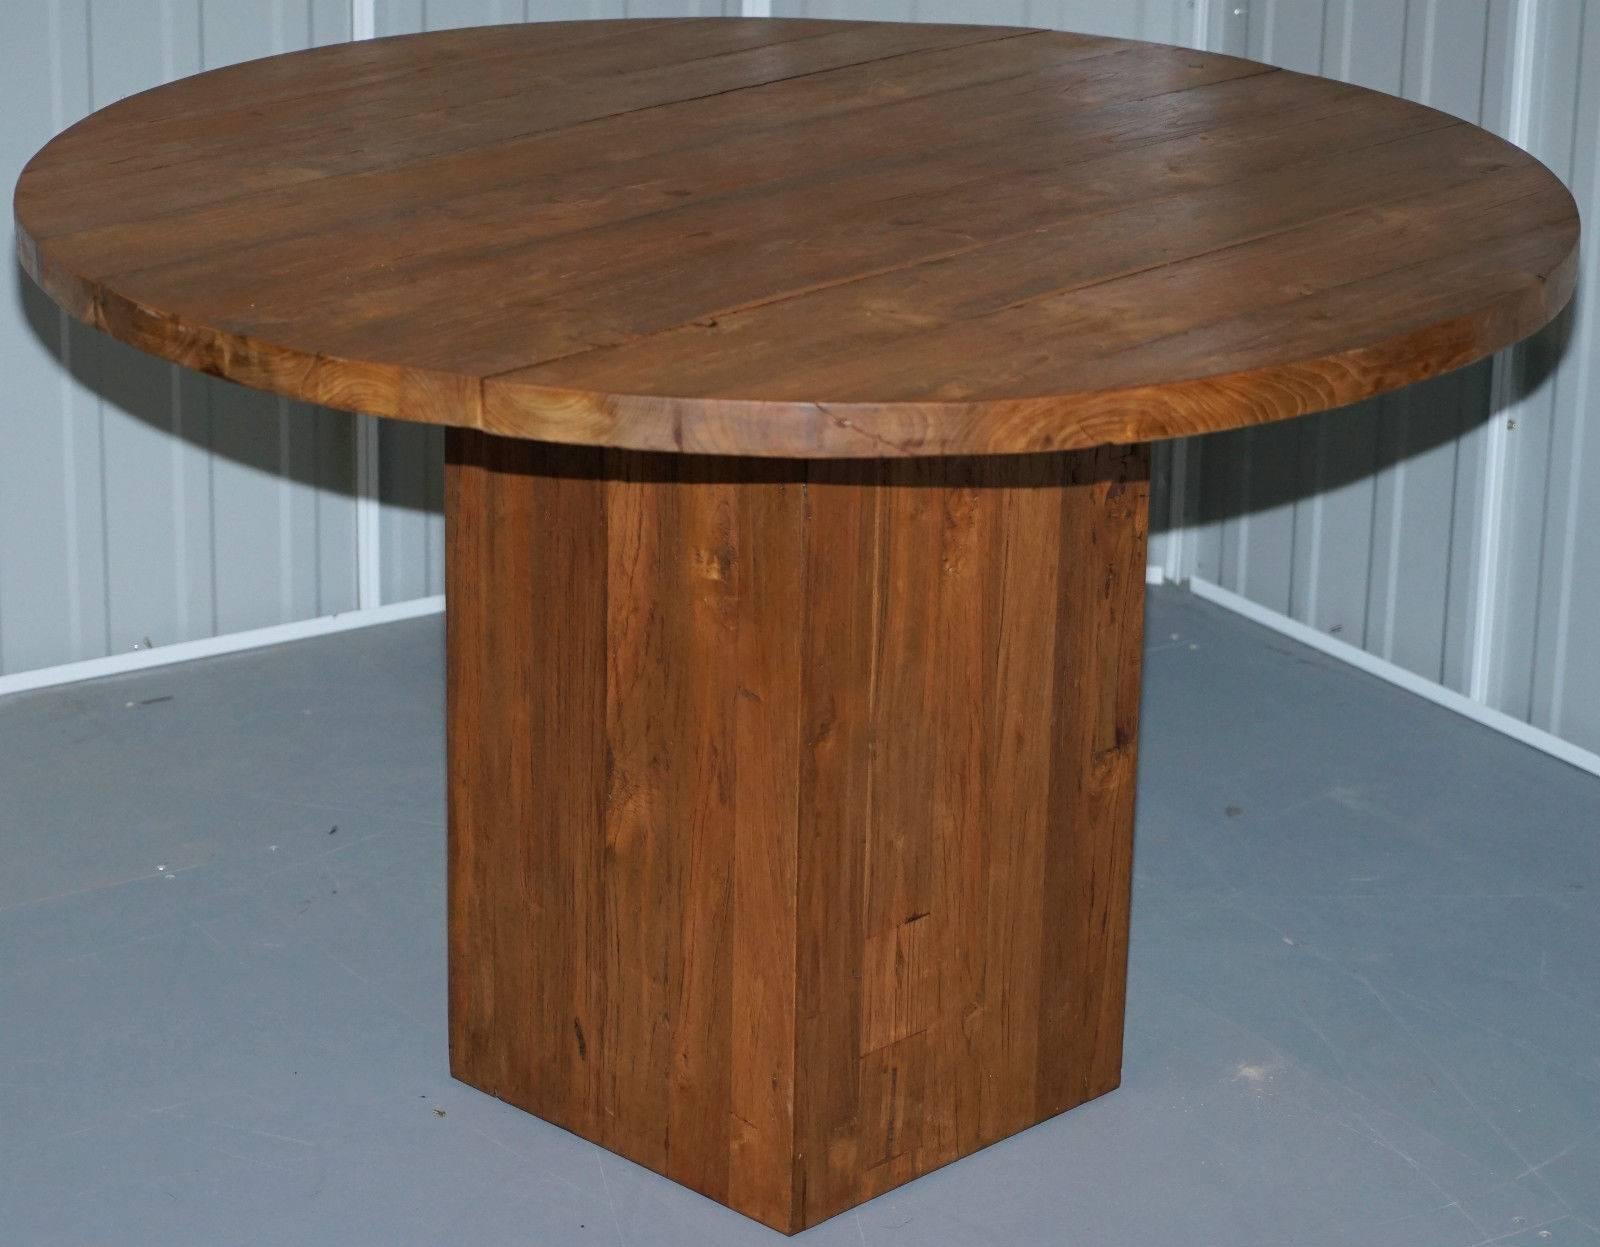 We are delighted to offer for sale this lovely RRP £1417 Raft furniture Megan solid reclaimed teak round dining table to seat four.

Built to last a lifetime with a style that will never date, the Megan is one of Raft’s most popular choices.